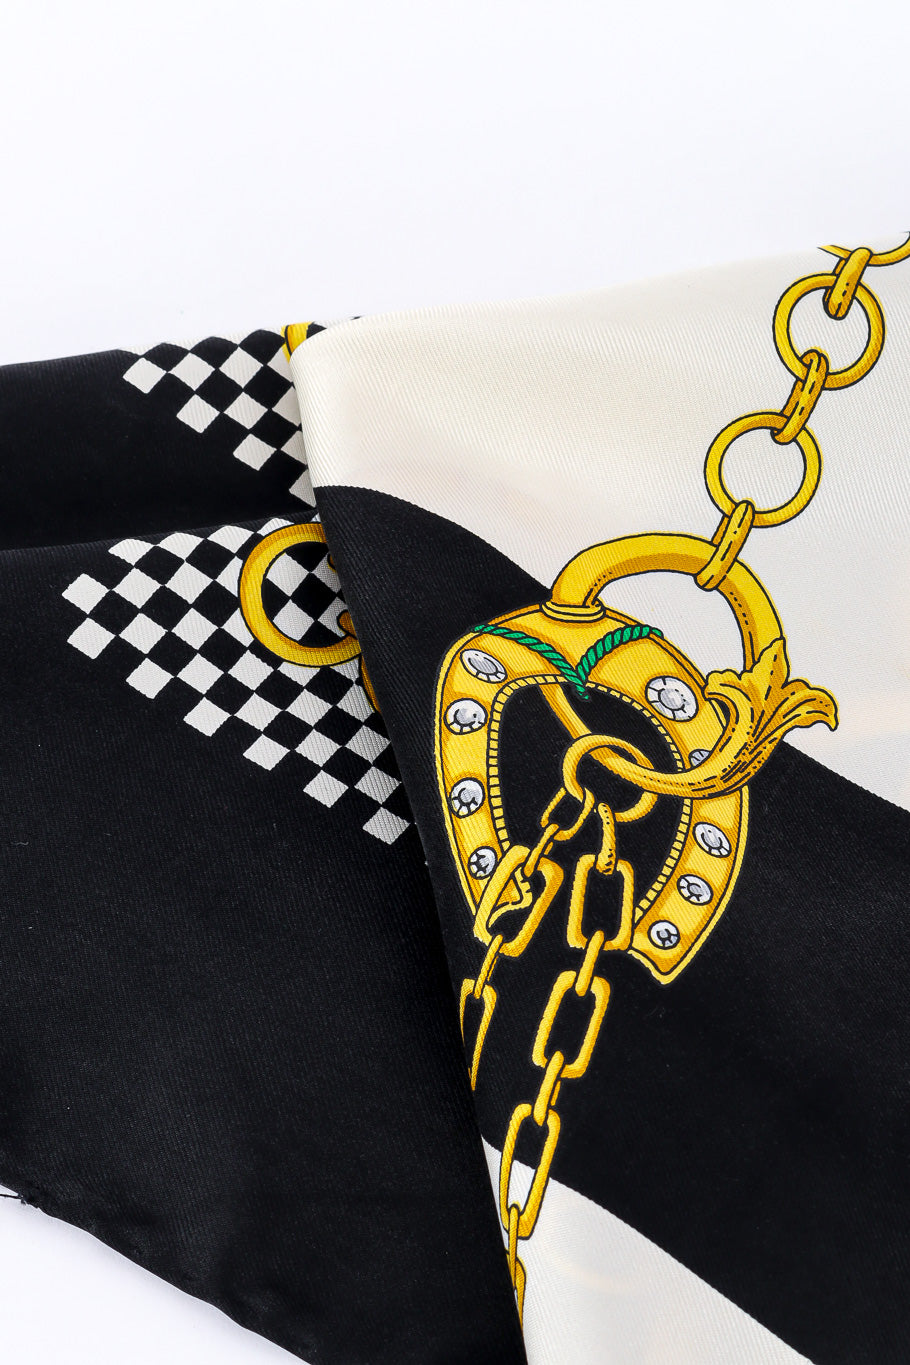 Equestrian chain graphic scarf by Celine photo of graphic details. @recessla